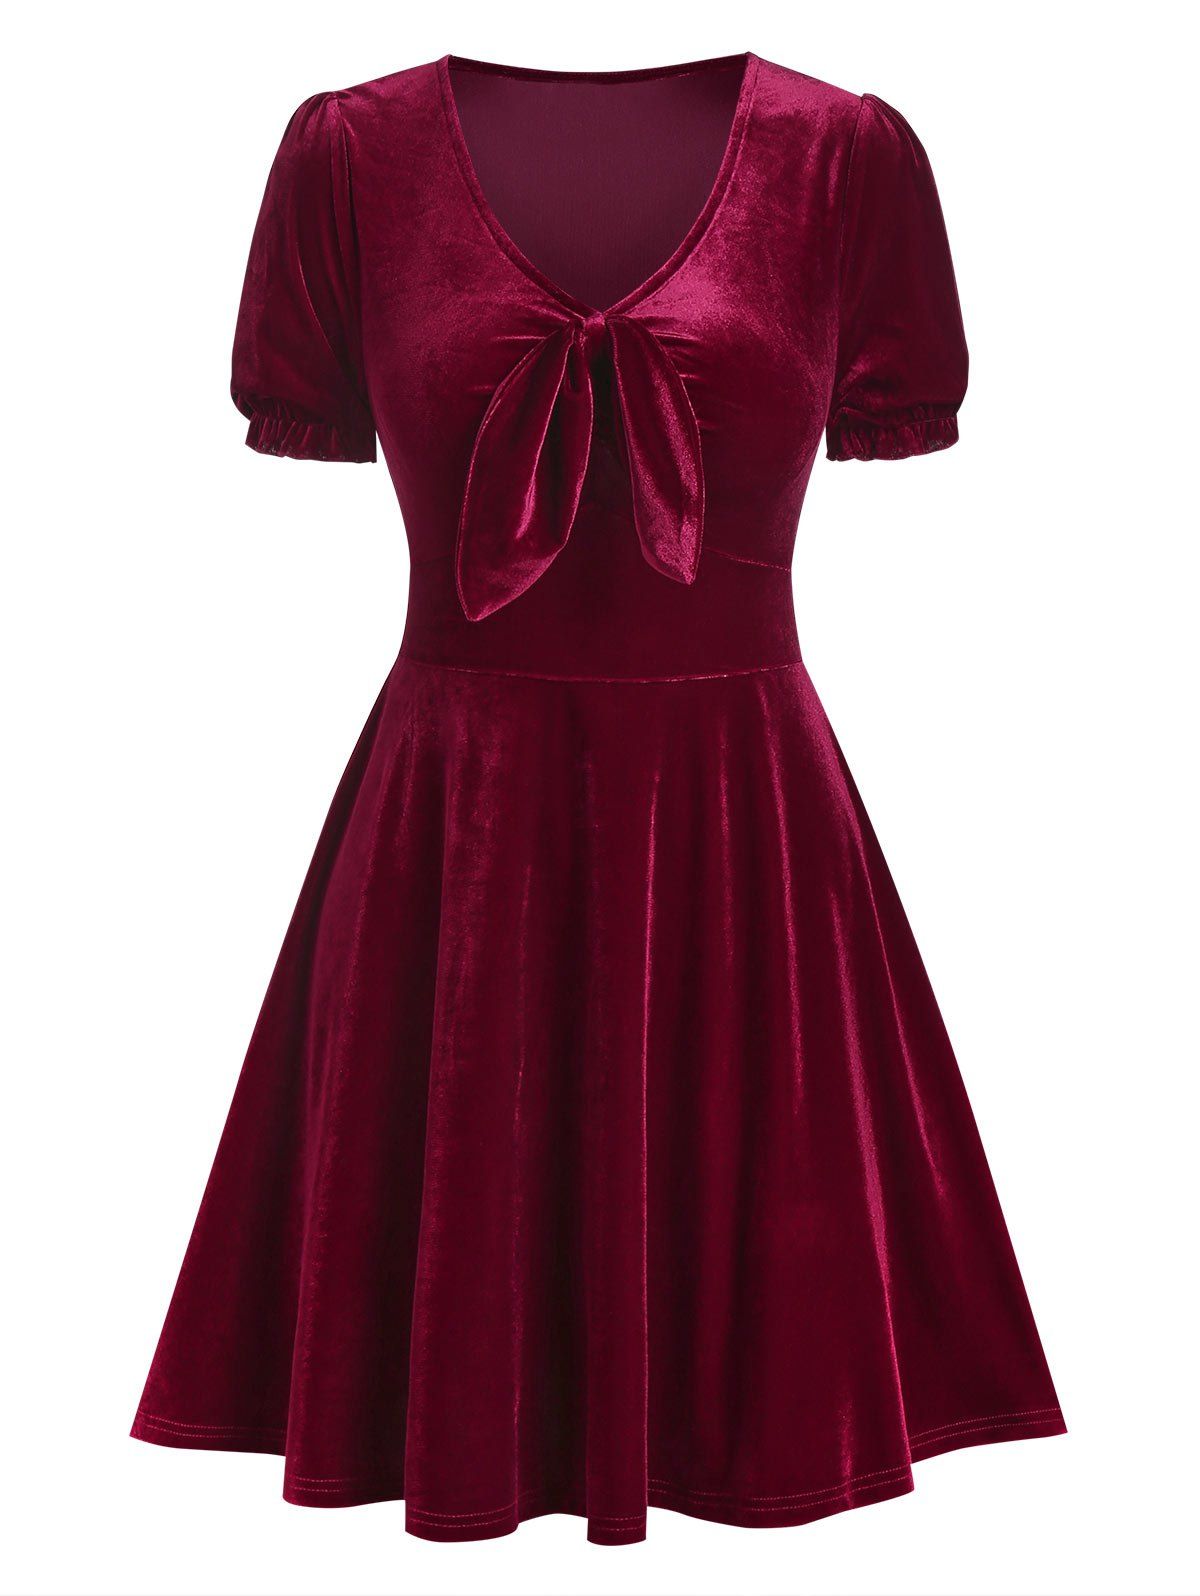 Vintage Retro Velvet Knotted Puff Sleeve A Line Mini Dress - DEEP RED L